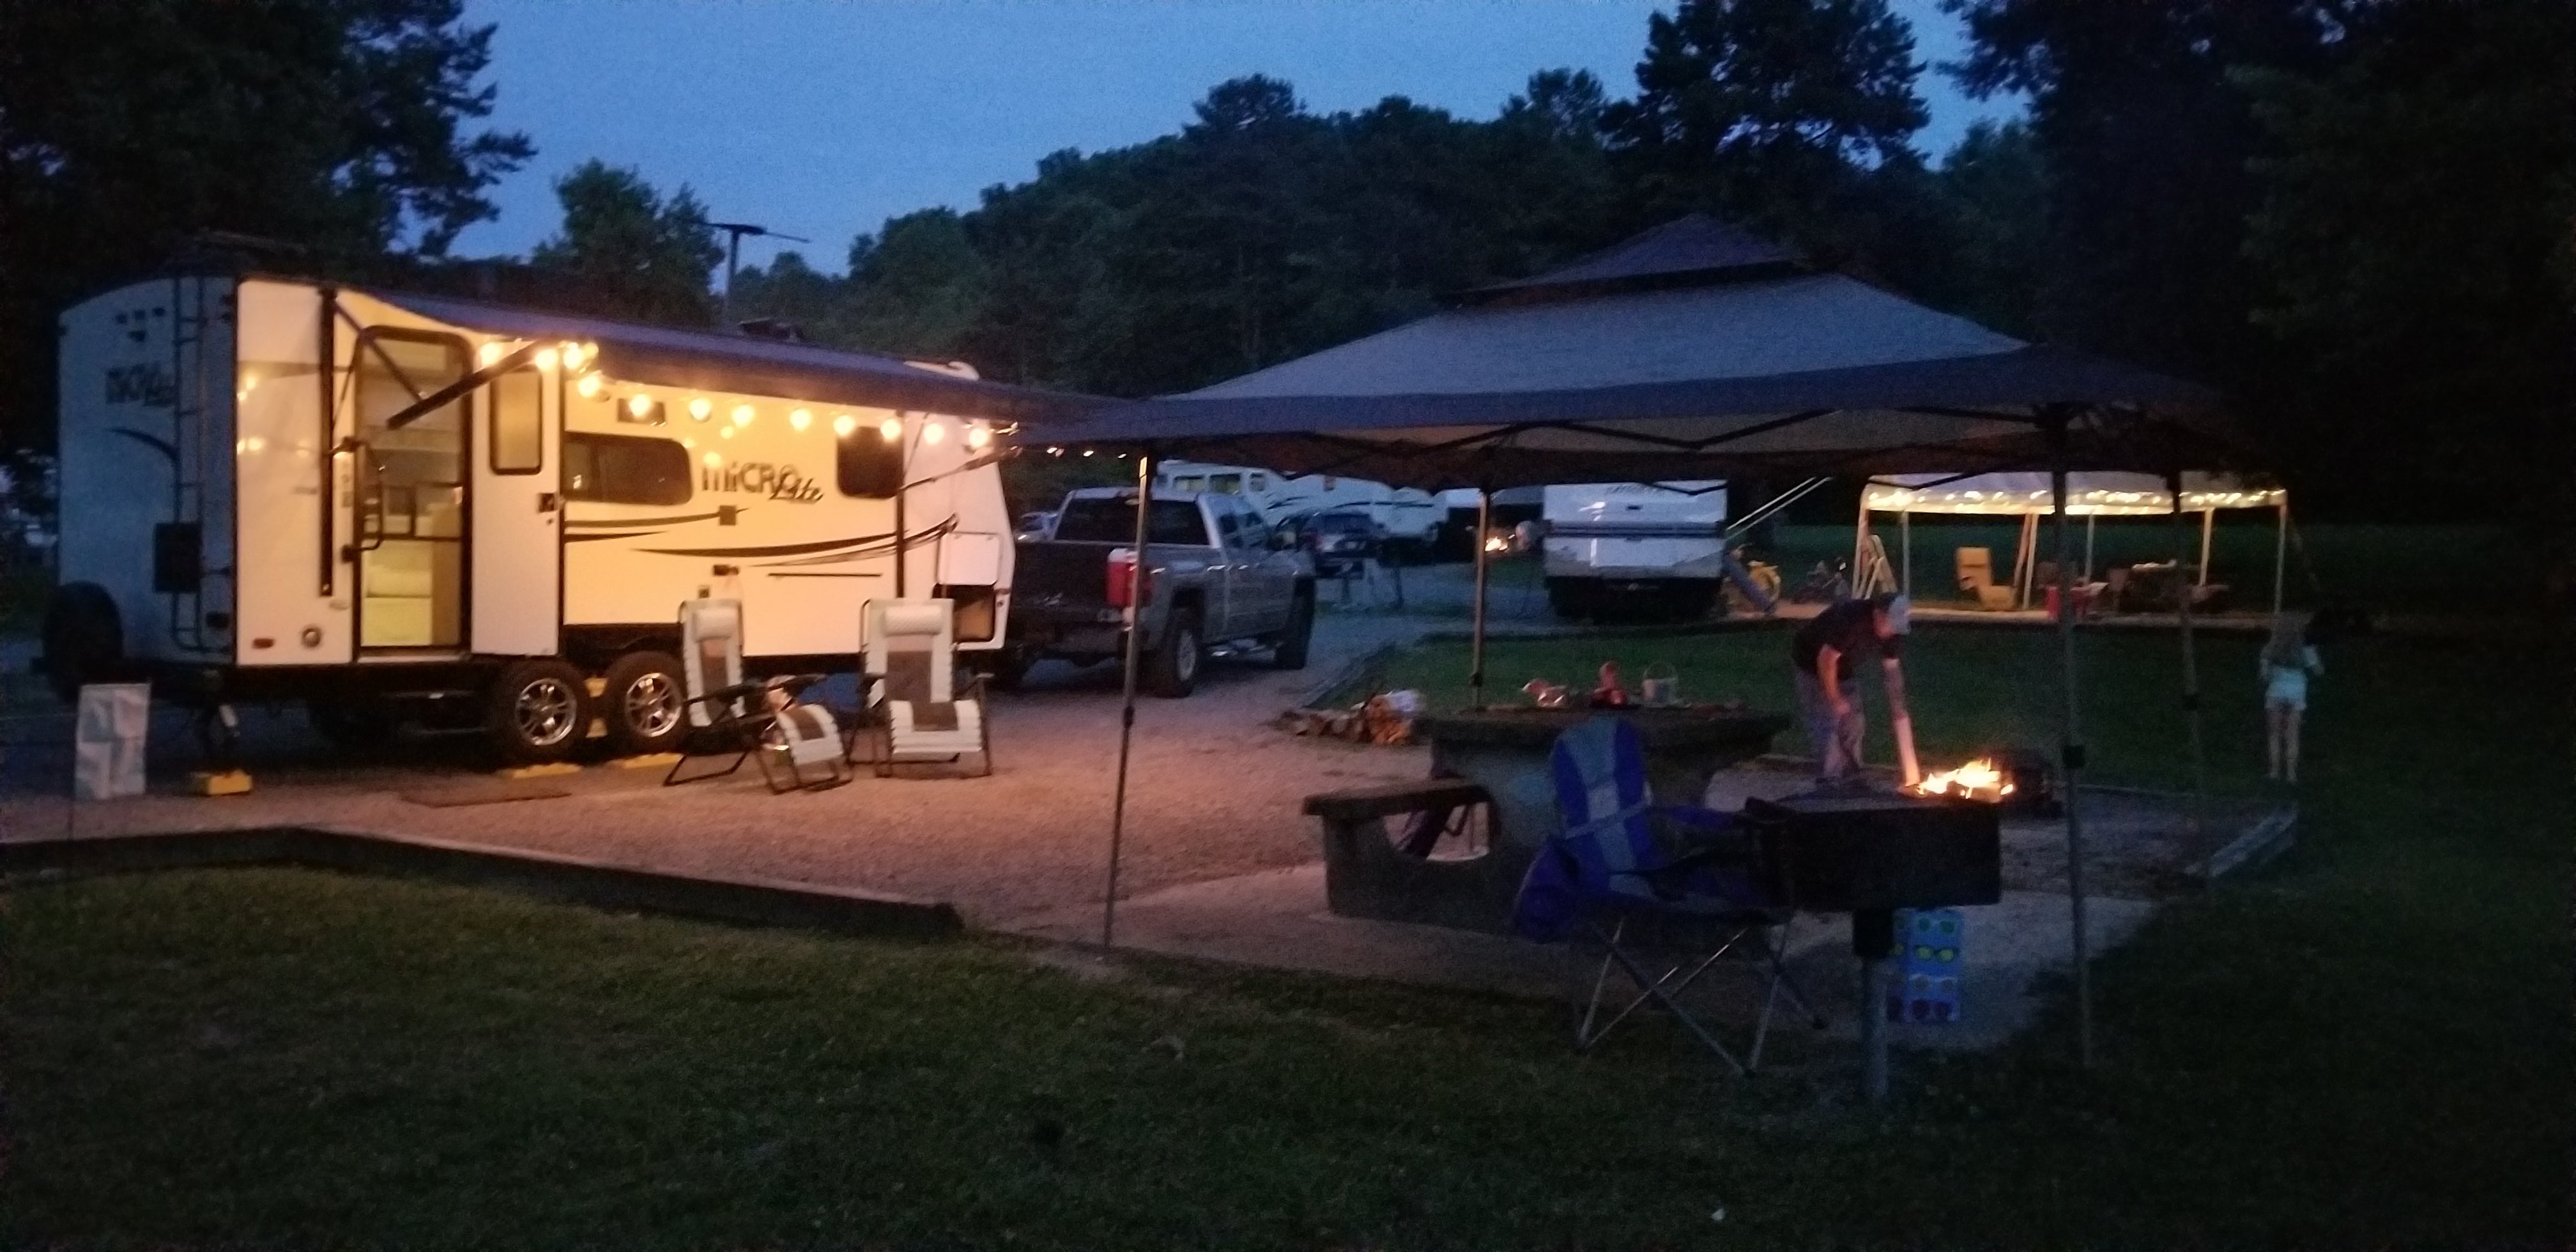 Camper submitted image from Barton Springs Campground - 3